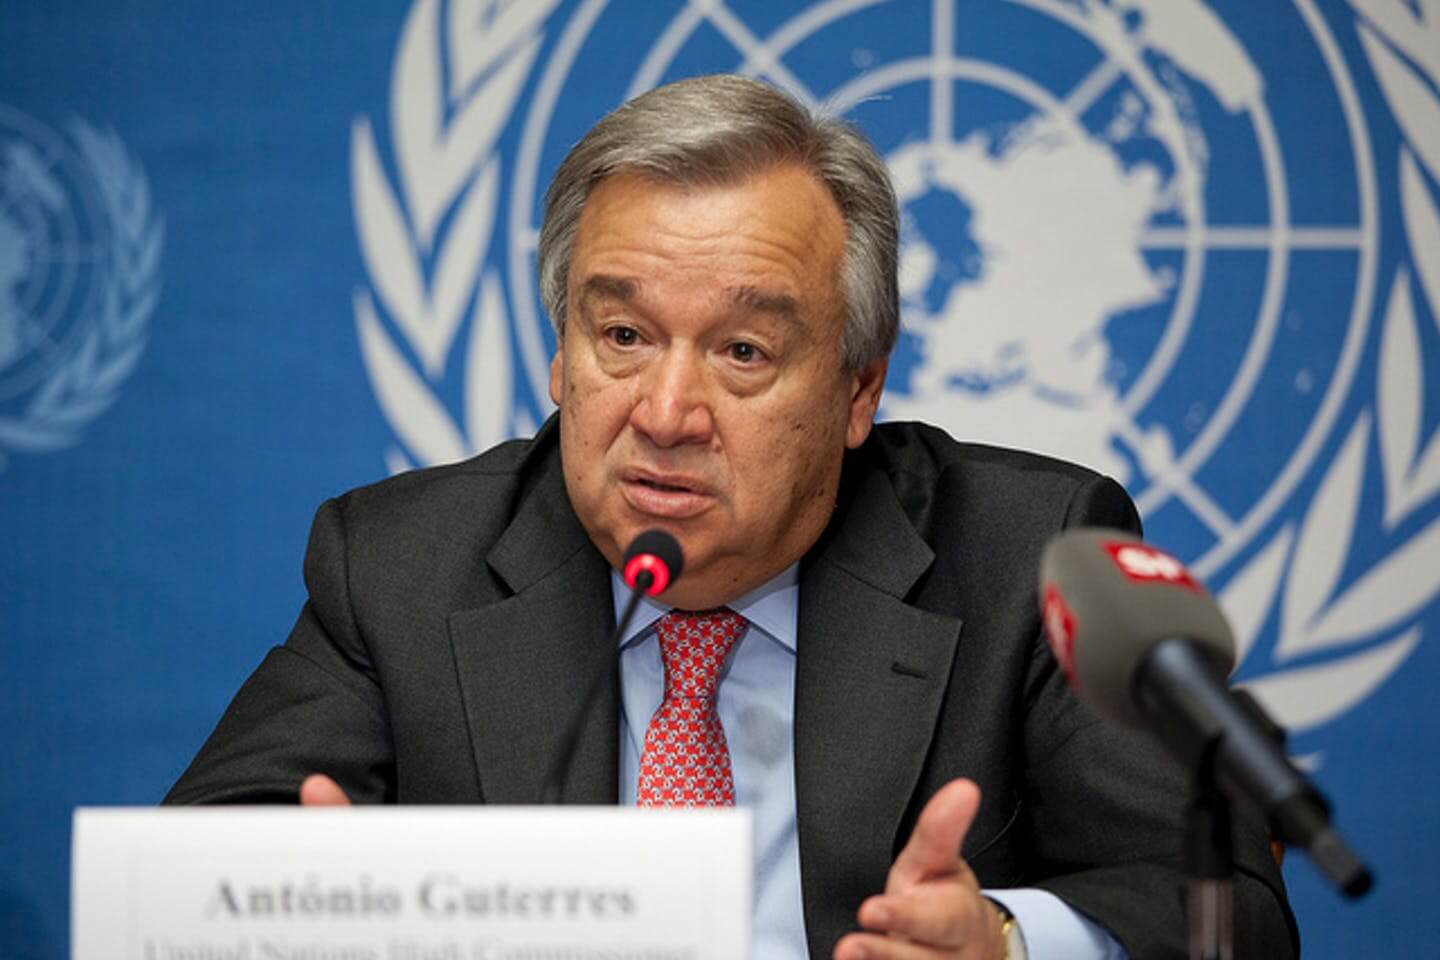 Humanity Waging “Suicidal” War on Nature, Says UN Chief